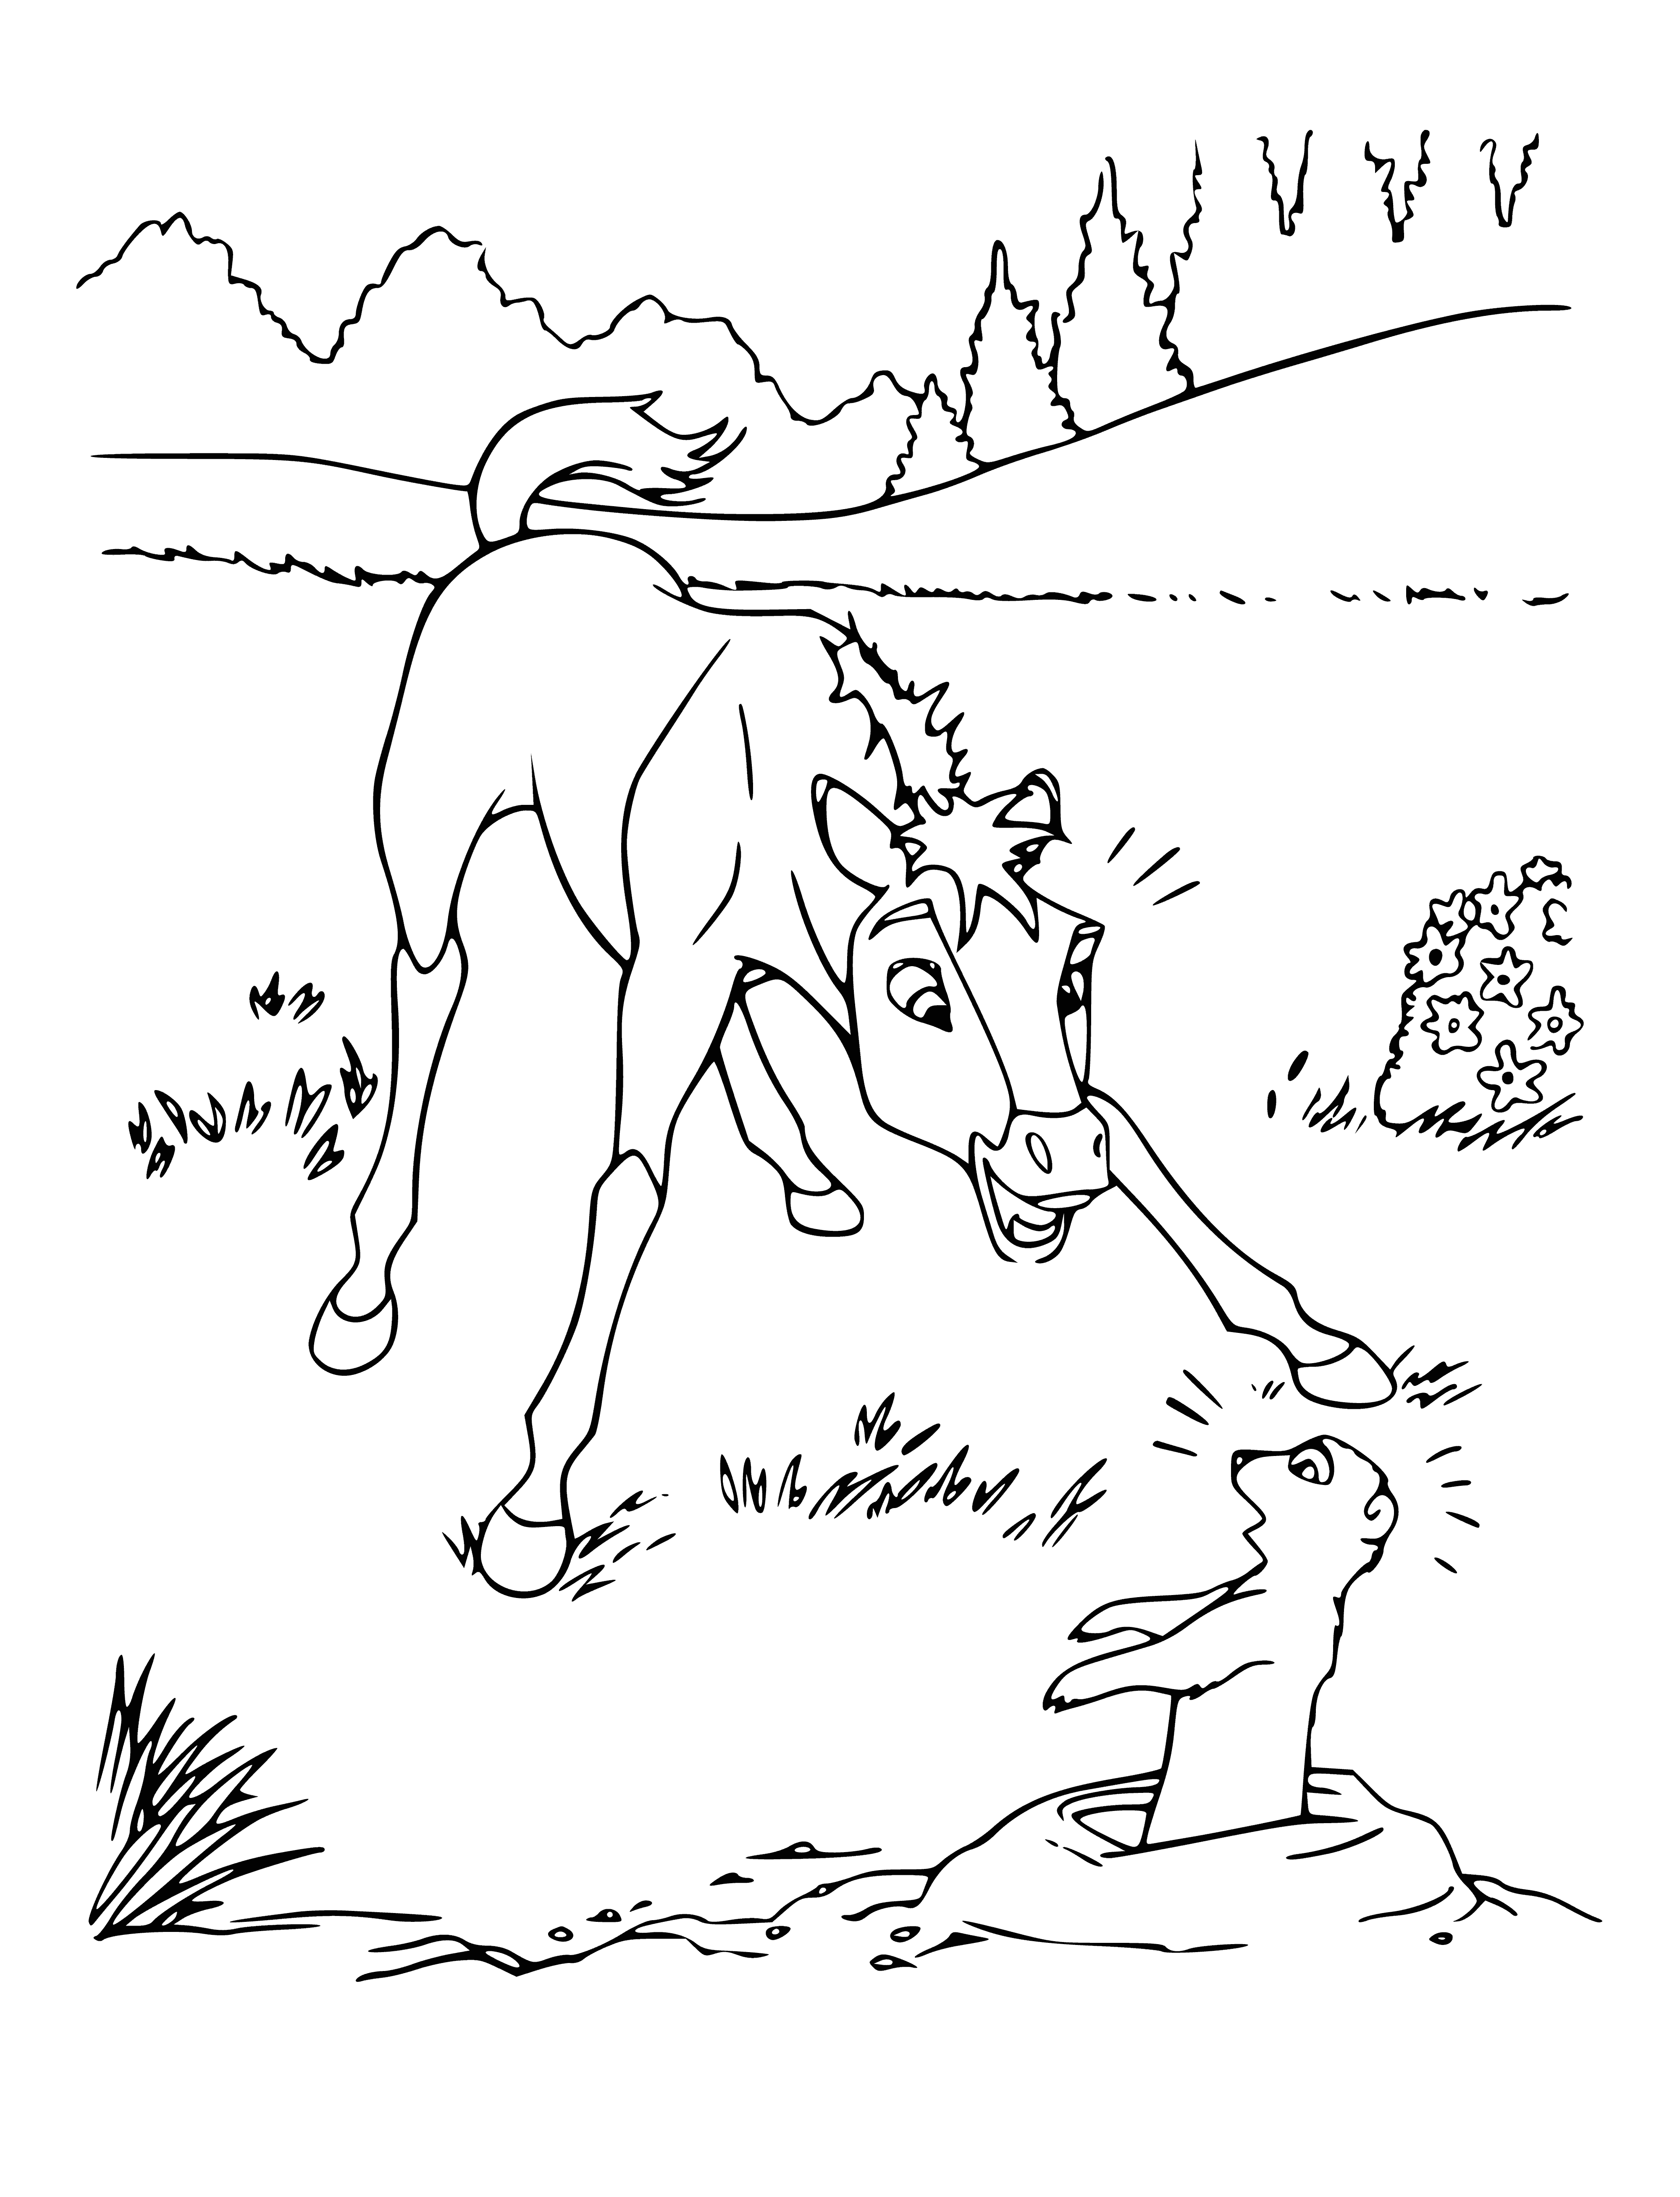 coloring page: A gopher touches the head of a foal lying on the ground.